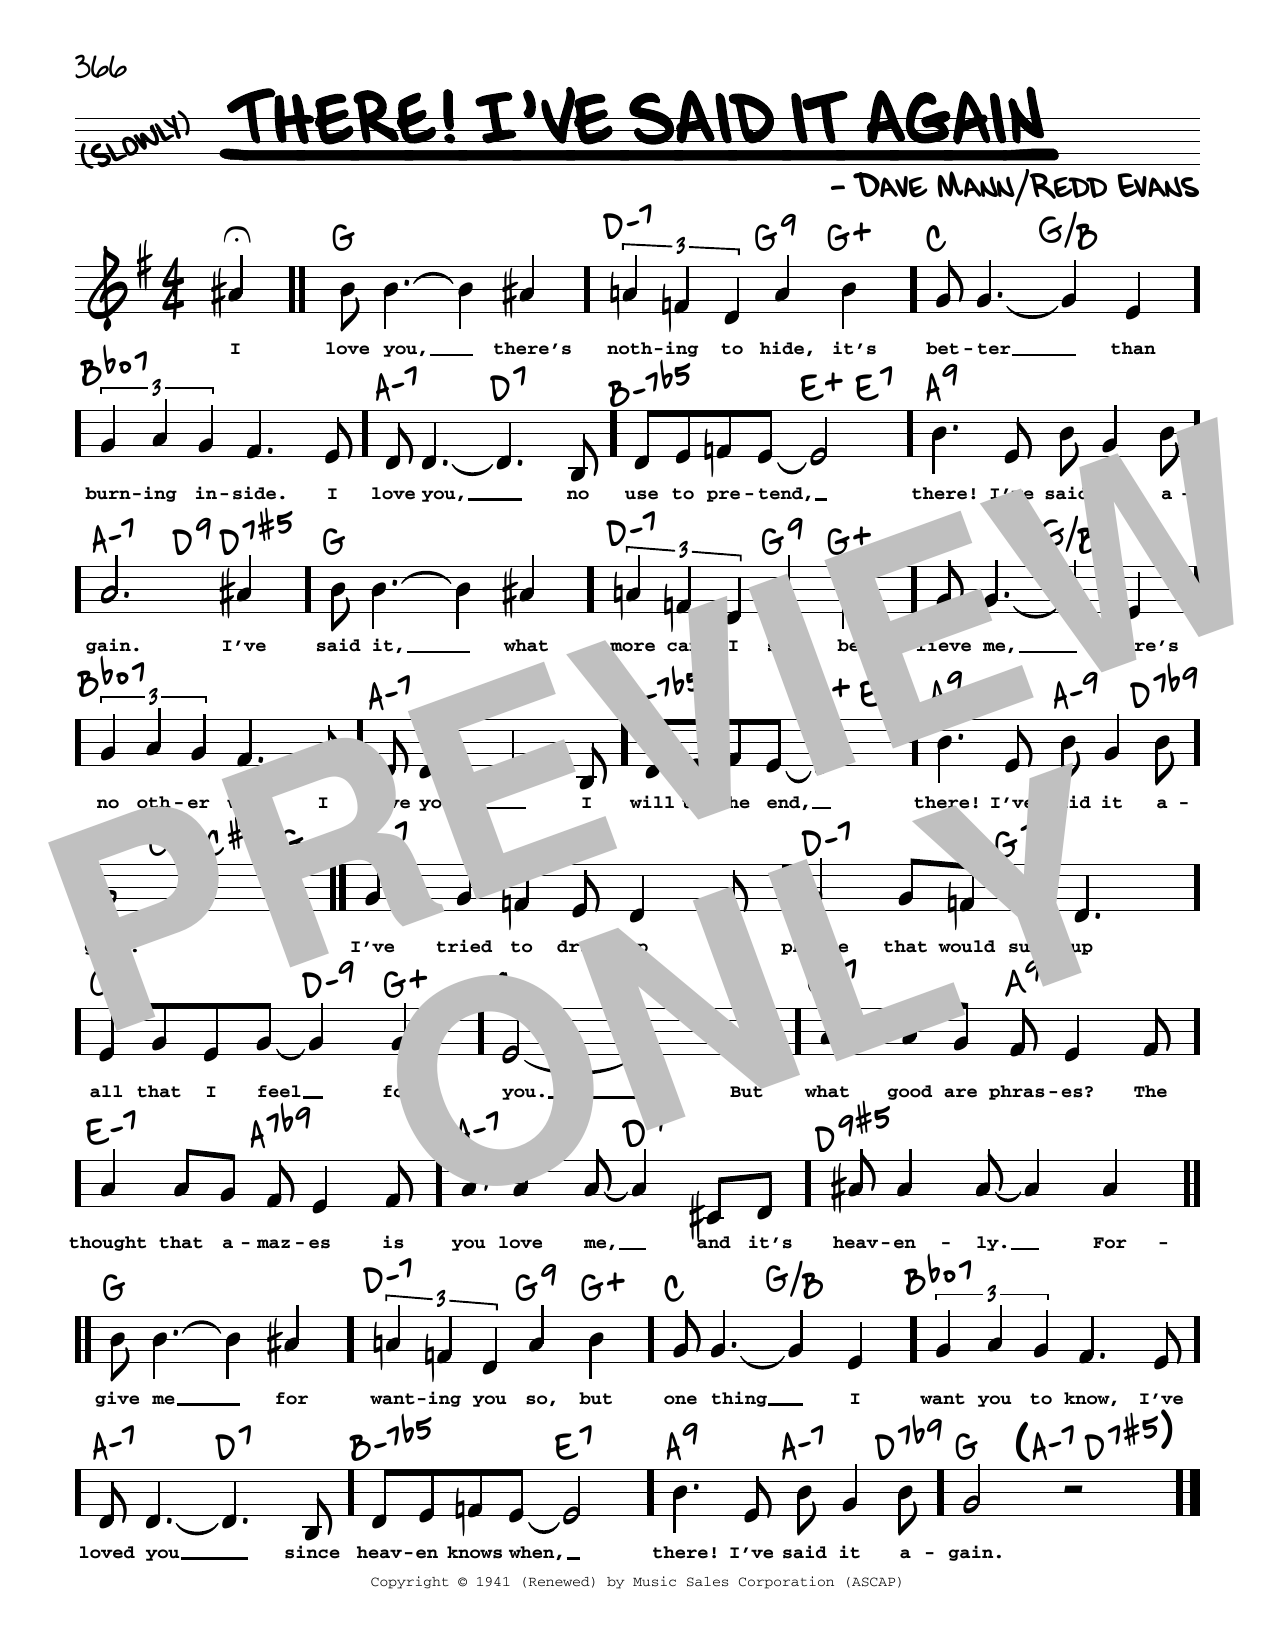 Download Dave Mann There! I've Said It Again (Low Voice) Sheet Music